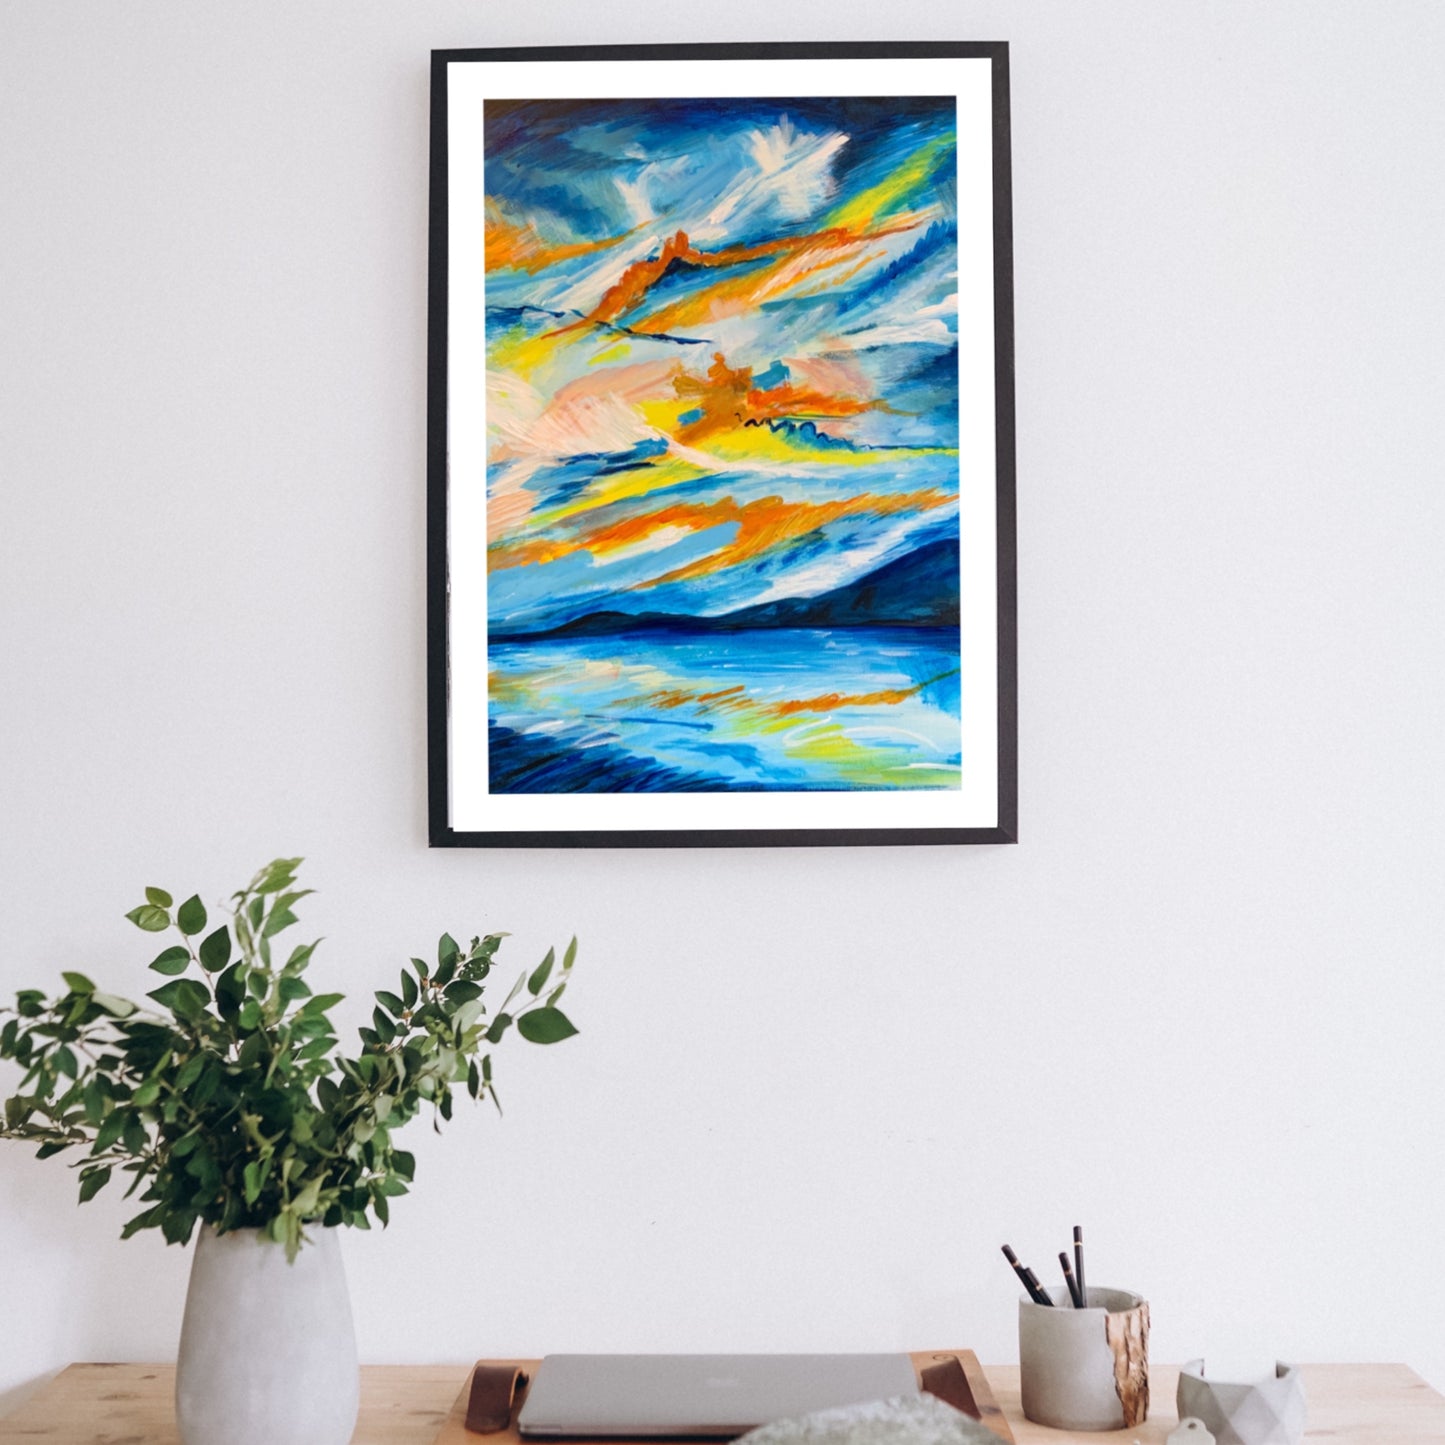 Blue Abstracted Skyscape 1 - Art Print